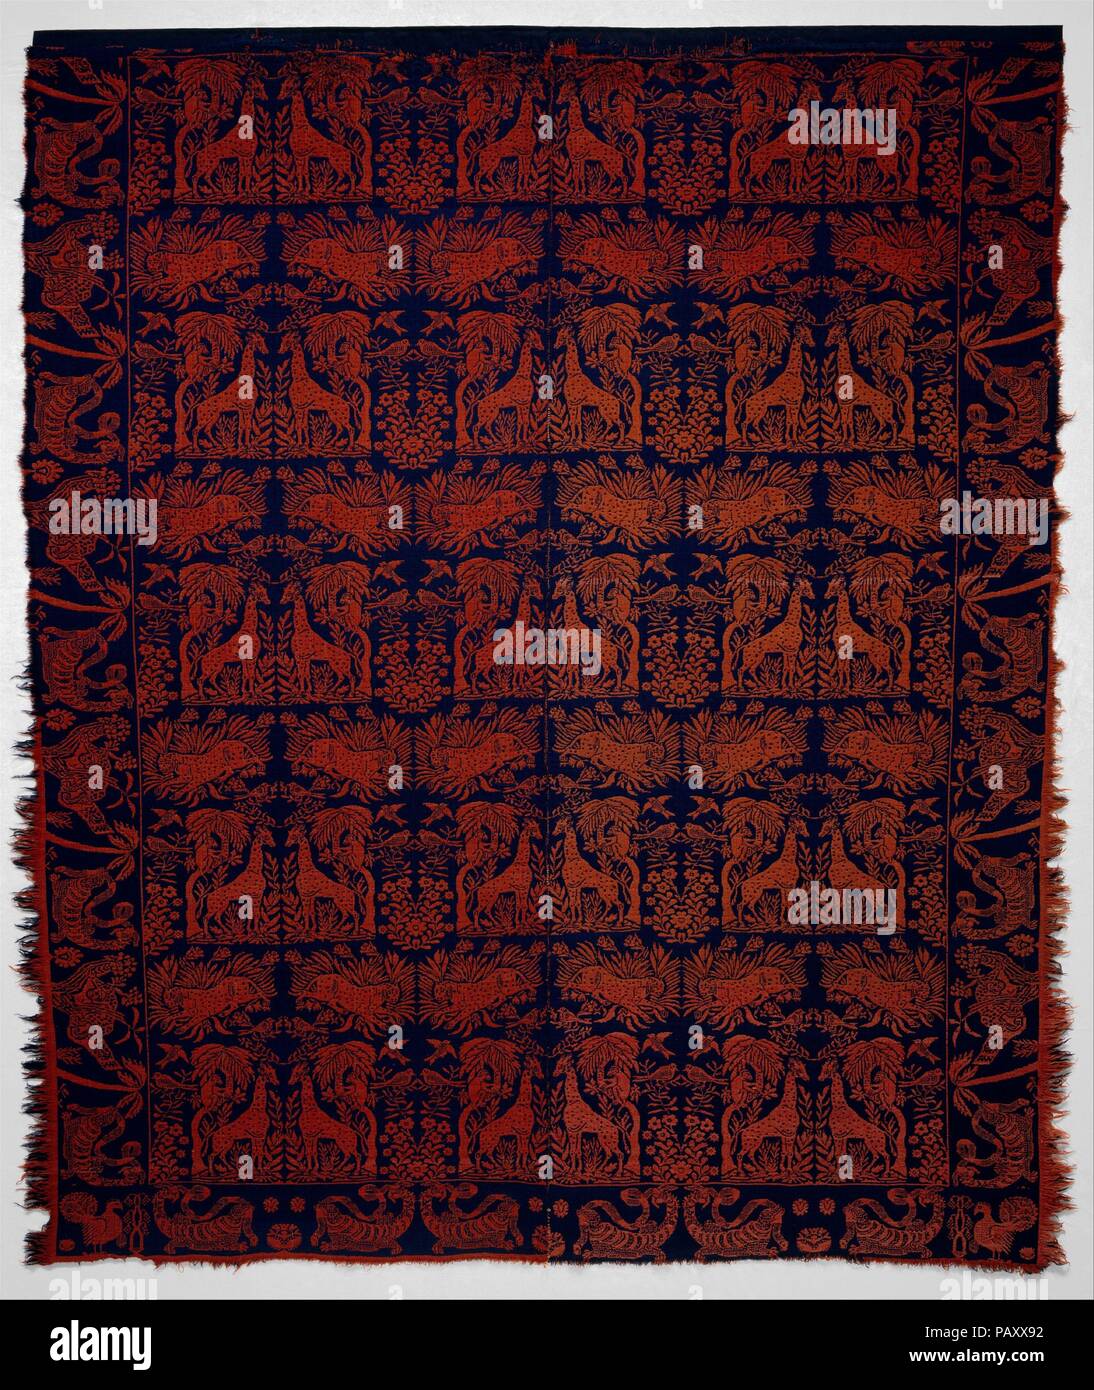 Coverlet. Culture: American. Dimensions: 85 x 73 in. (215.9 x 185.4 cm). Date: ca. 1840-50.  This coverlet is woven with red and blue wool warps and red and blue wool wefts in two panels and seamed at the center. The field shows a menagerie of animals, including giraffes, leopards, monkeys, and birds. The borders have images of an alligator eating a snake alternating with a pouncing leopard. In contrast to the predominant jungle motifs, domesticated fowl are depicted on the corner blocks. Museum: Metropolitan Museum of Art, New York, USA. Stock Photo